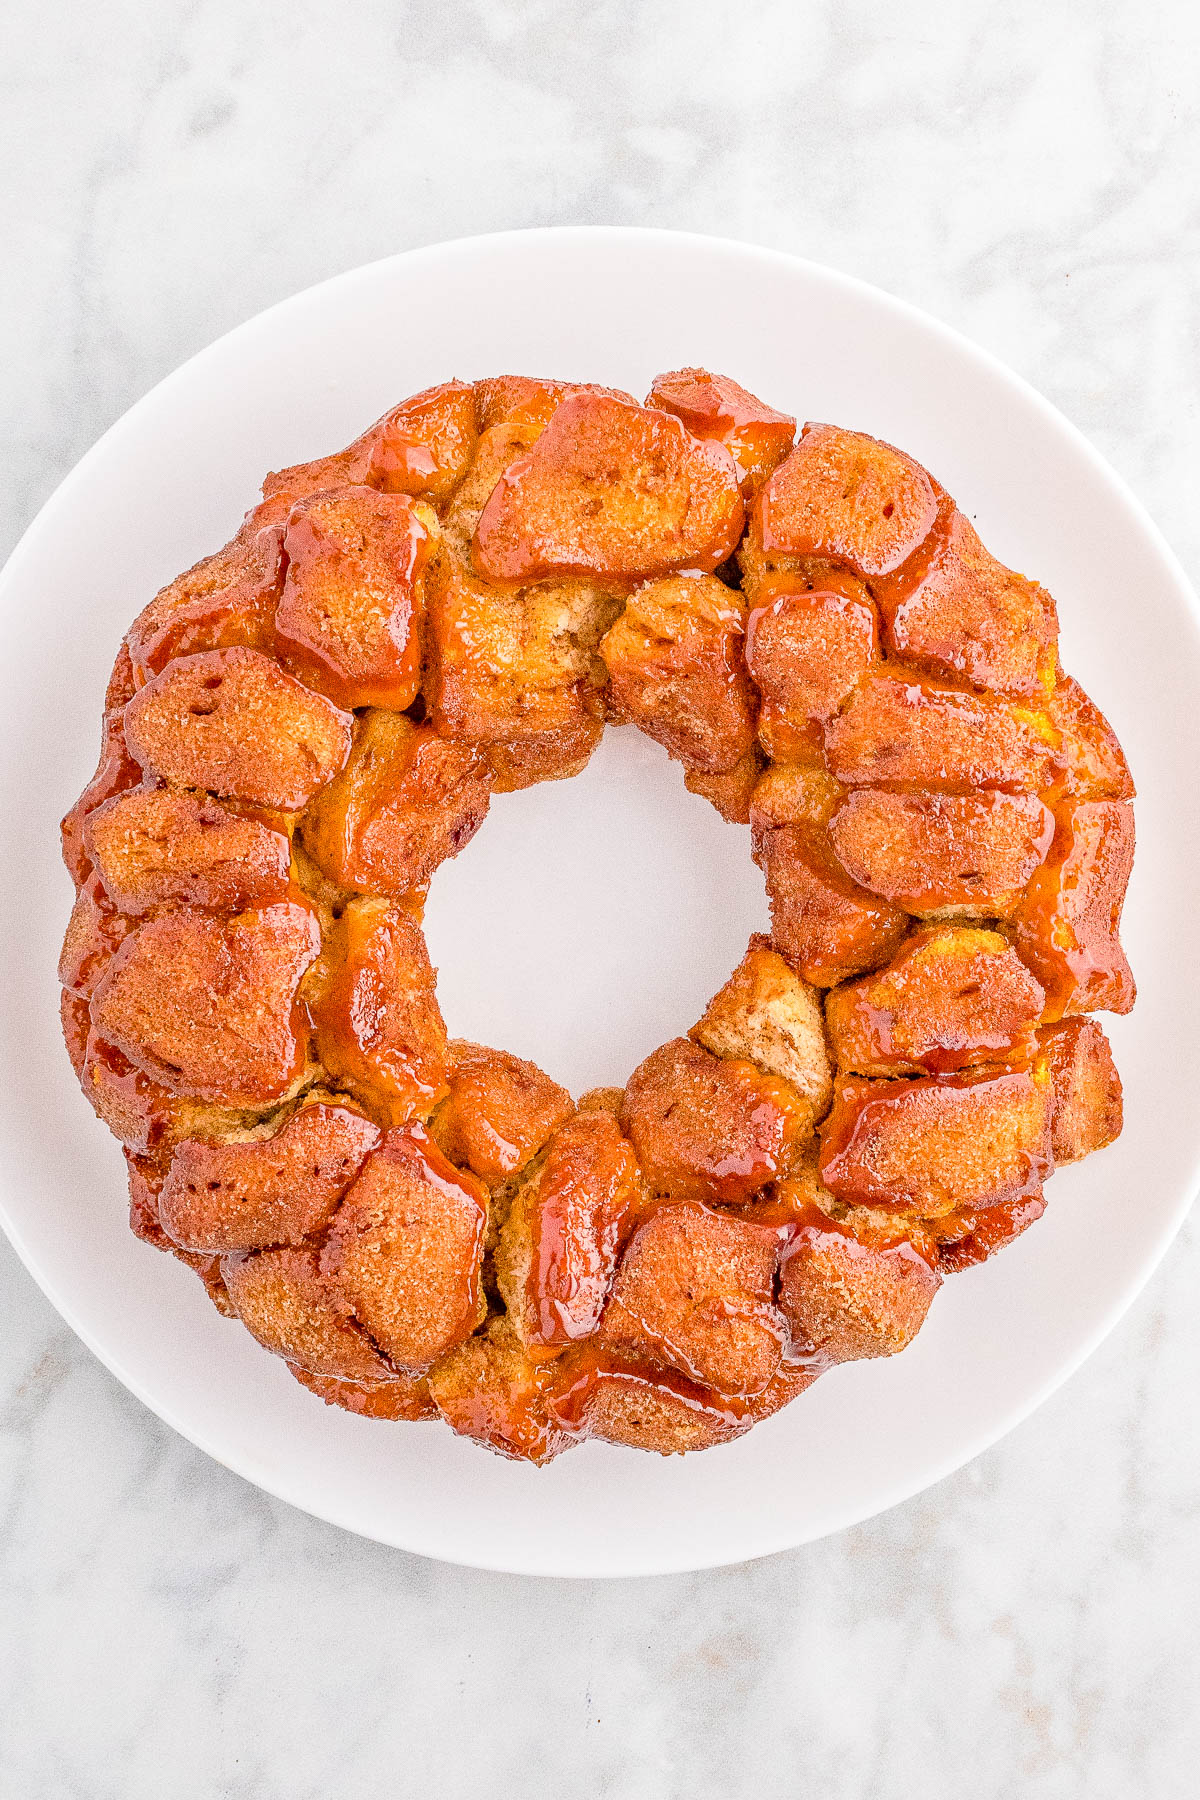 A large monkey bread on a white plate, featuring golden-brown, sugar-coated dough pieces arranged in a circular wreath shape.